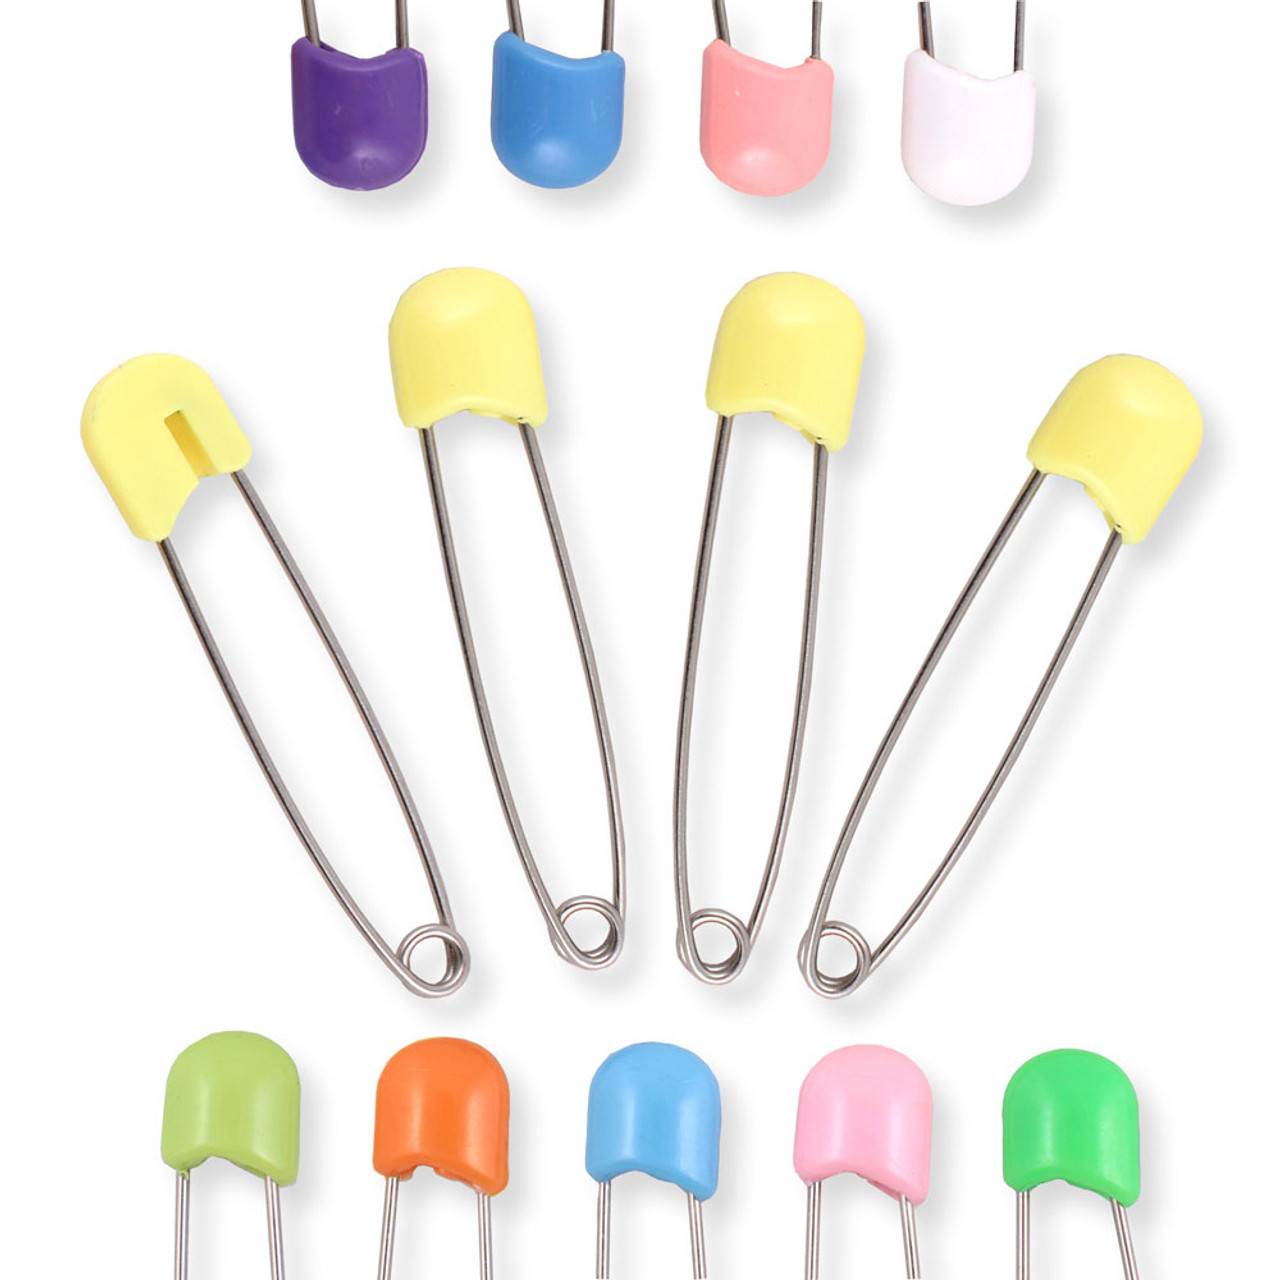 Adult XL Stainless Steel Locking Diaper Pins - Incontrol Diapers